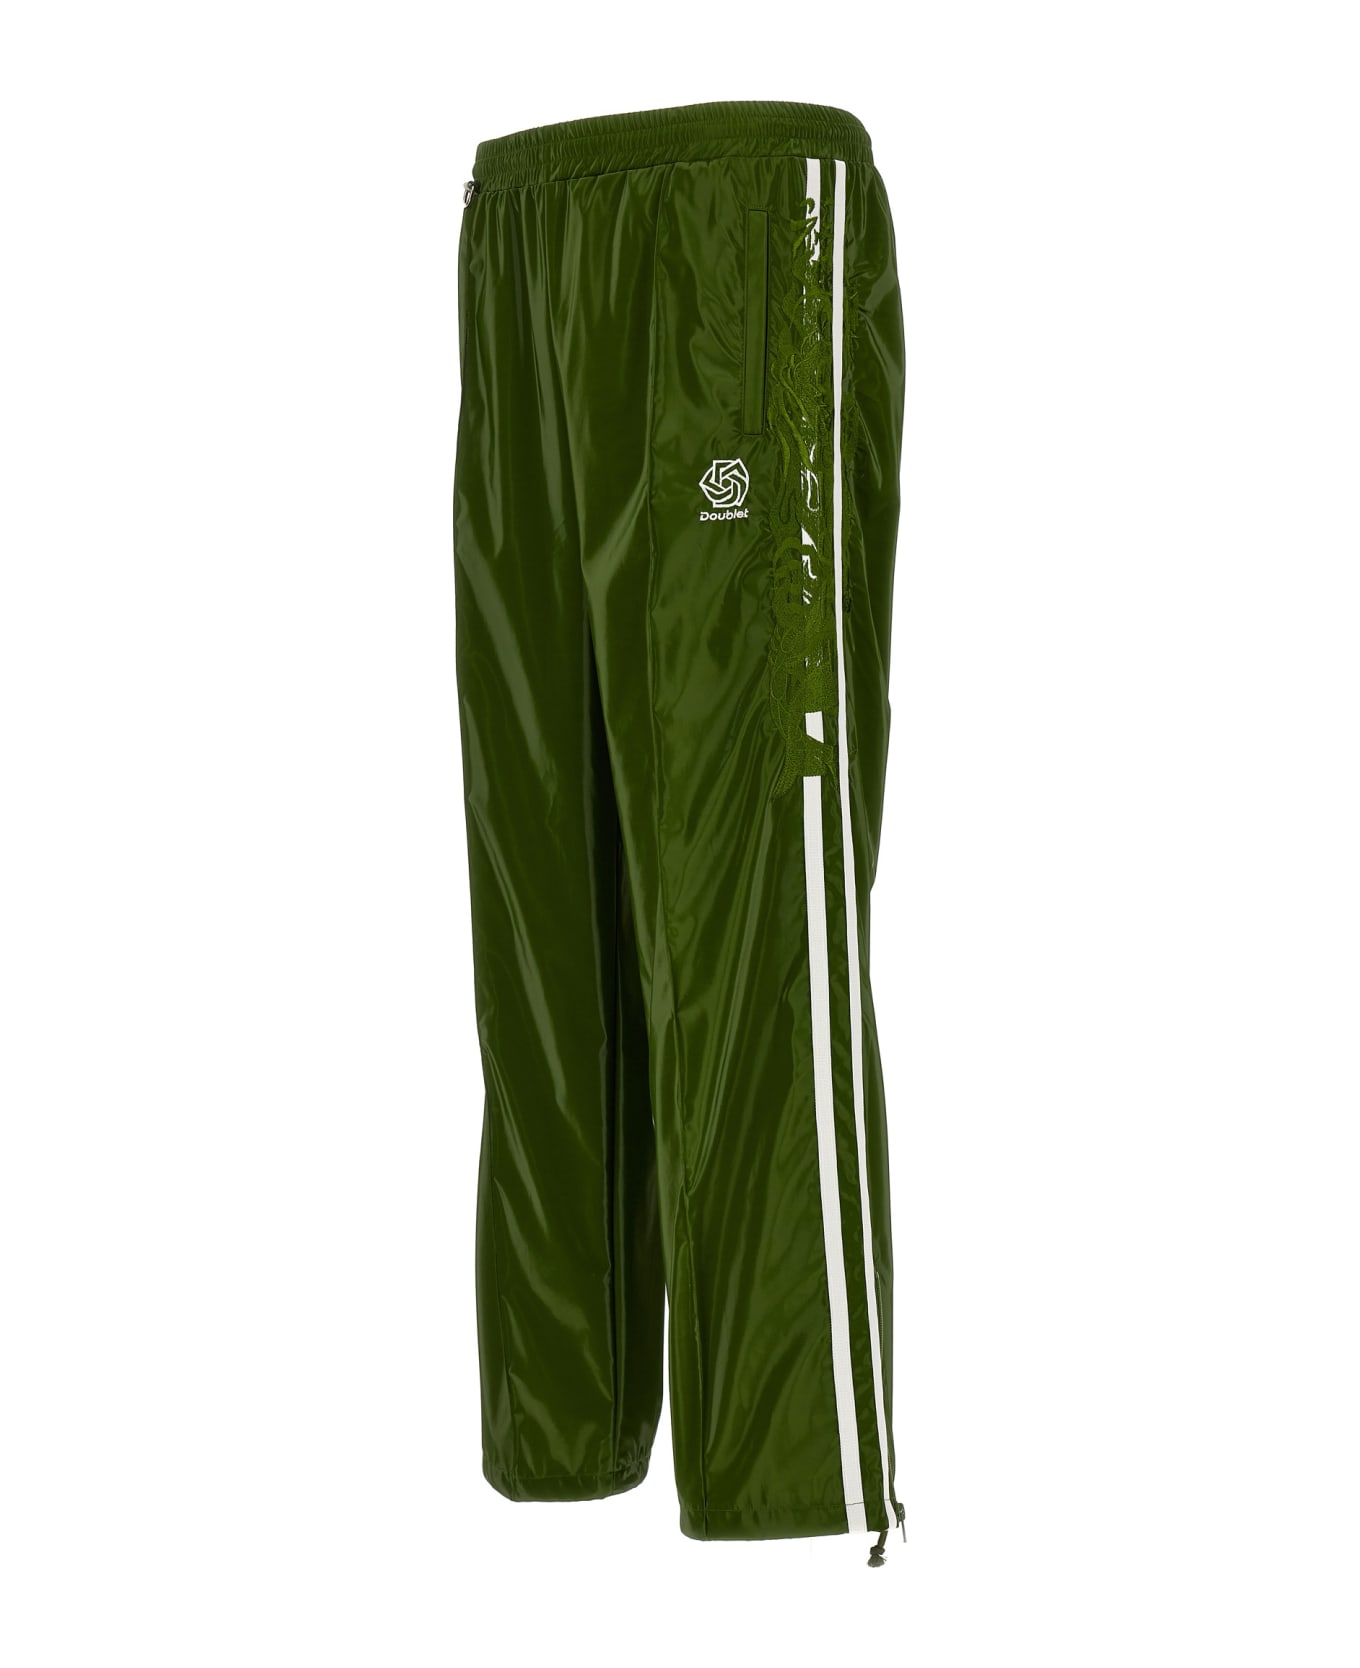 doublet 'laminate Track' Joggers - Green ボトムス